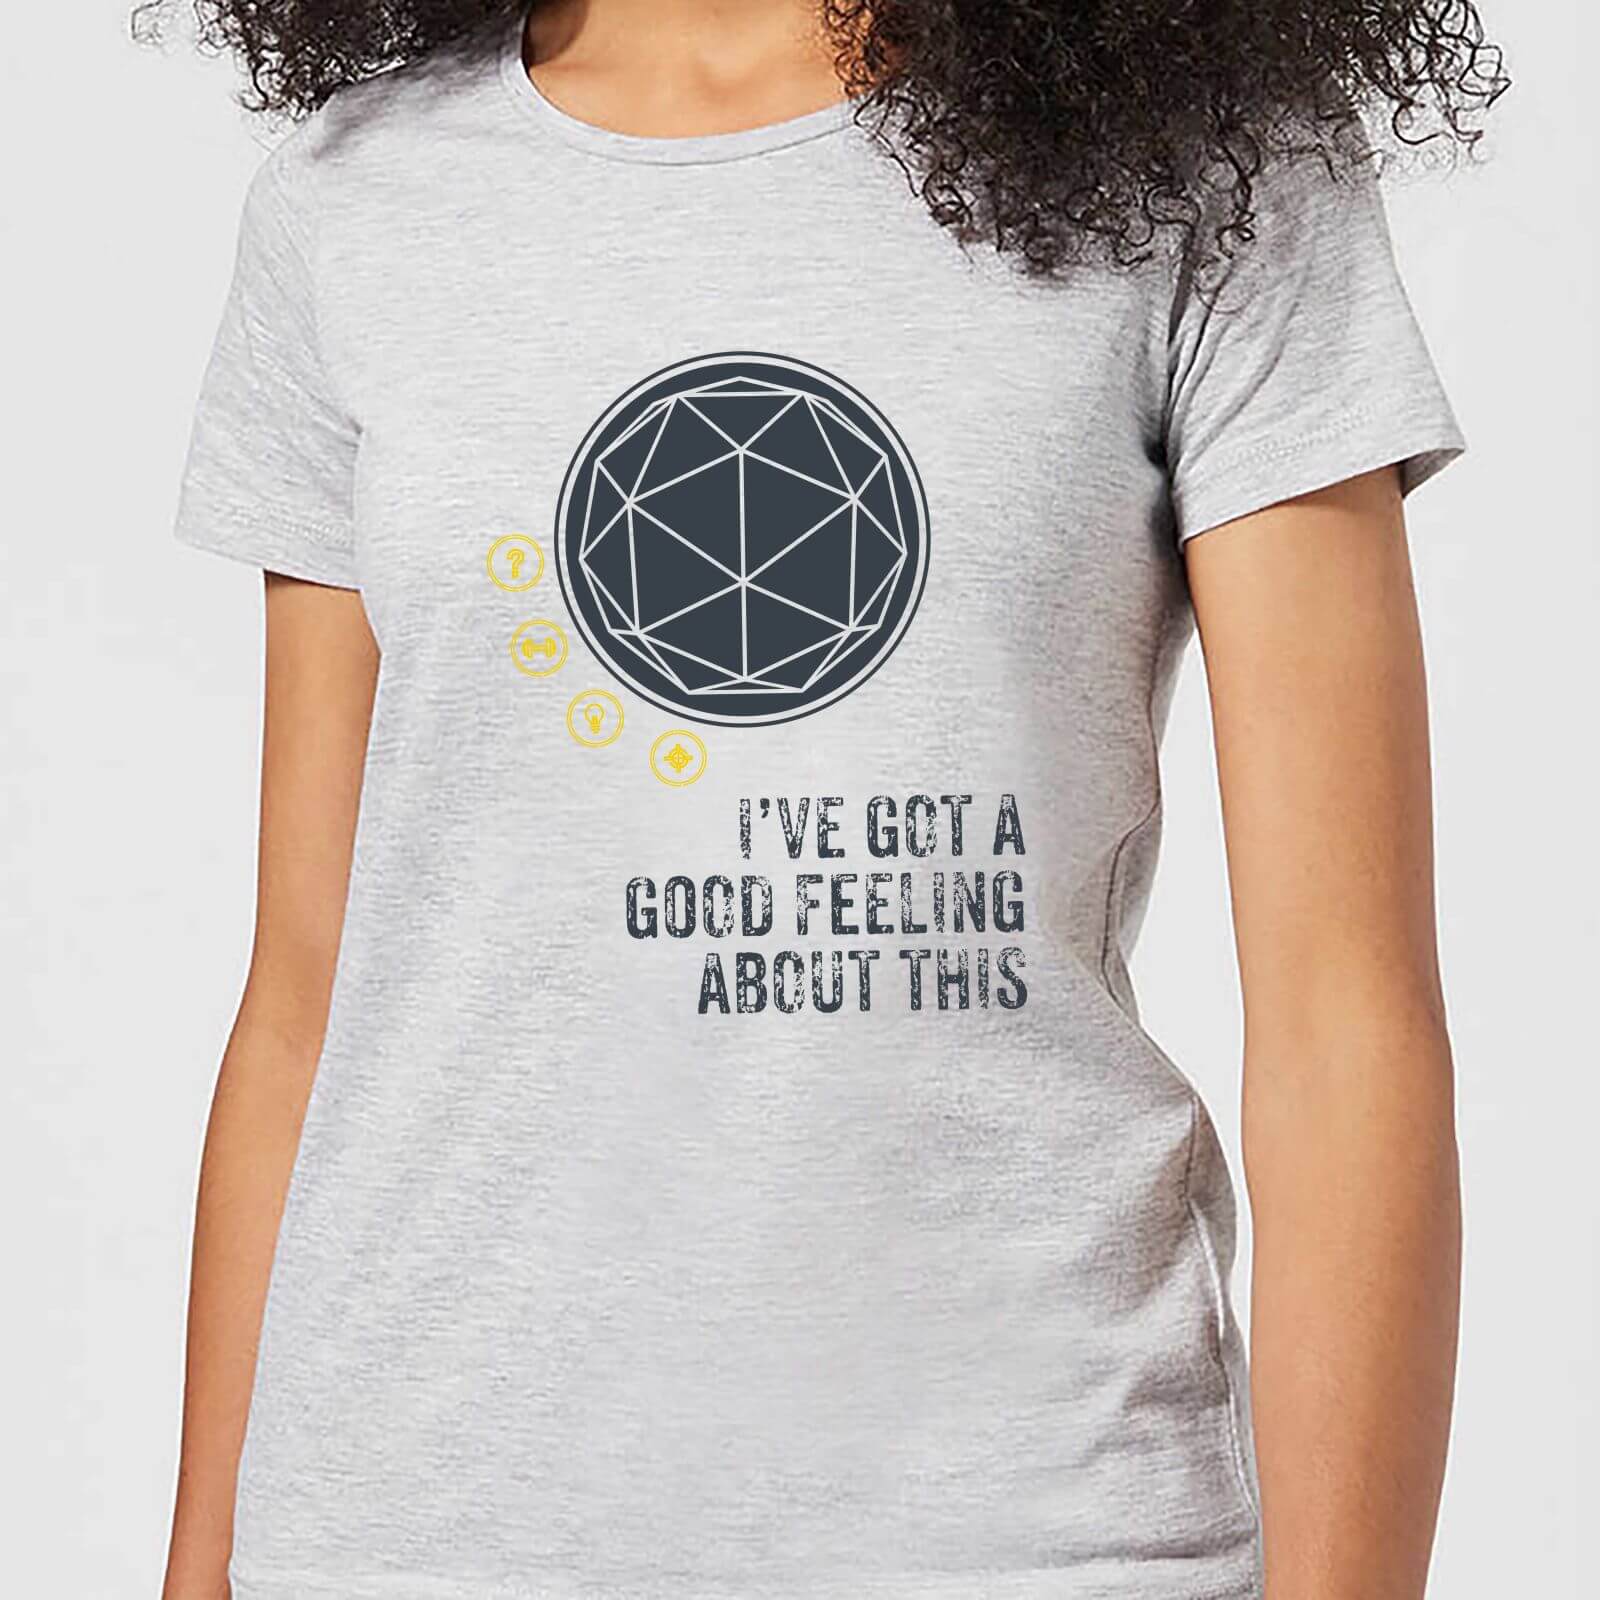 Crystal Maze I've Got A Good Feeling About This- Industrial Women's T-Shirt - Grey - S - Grey